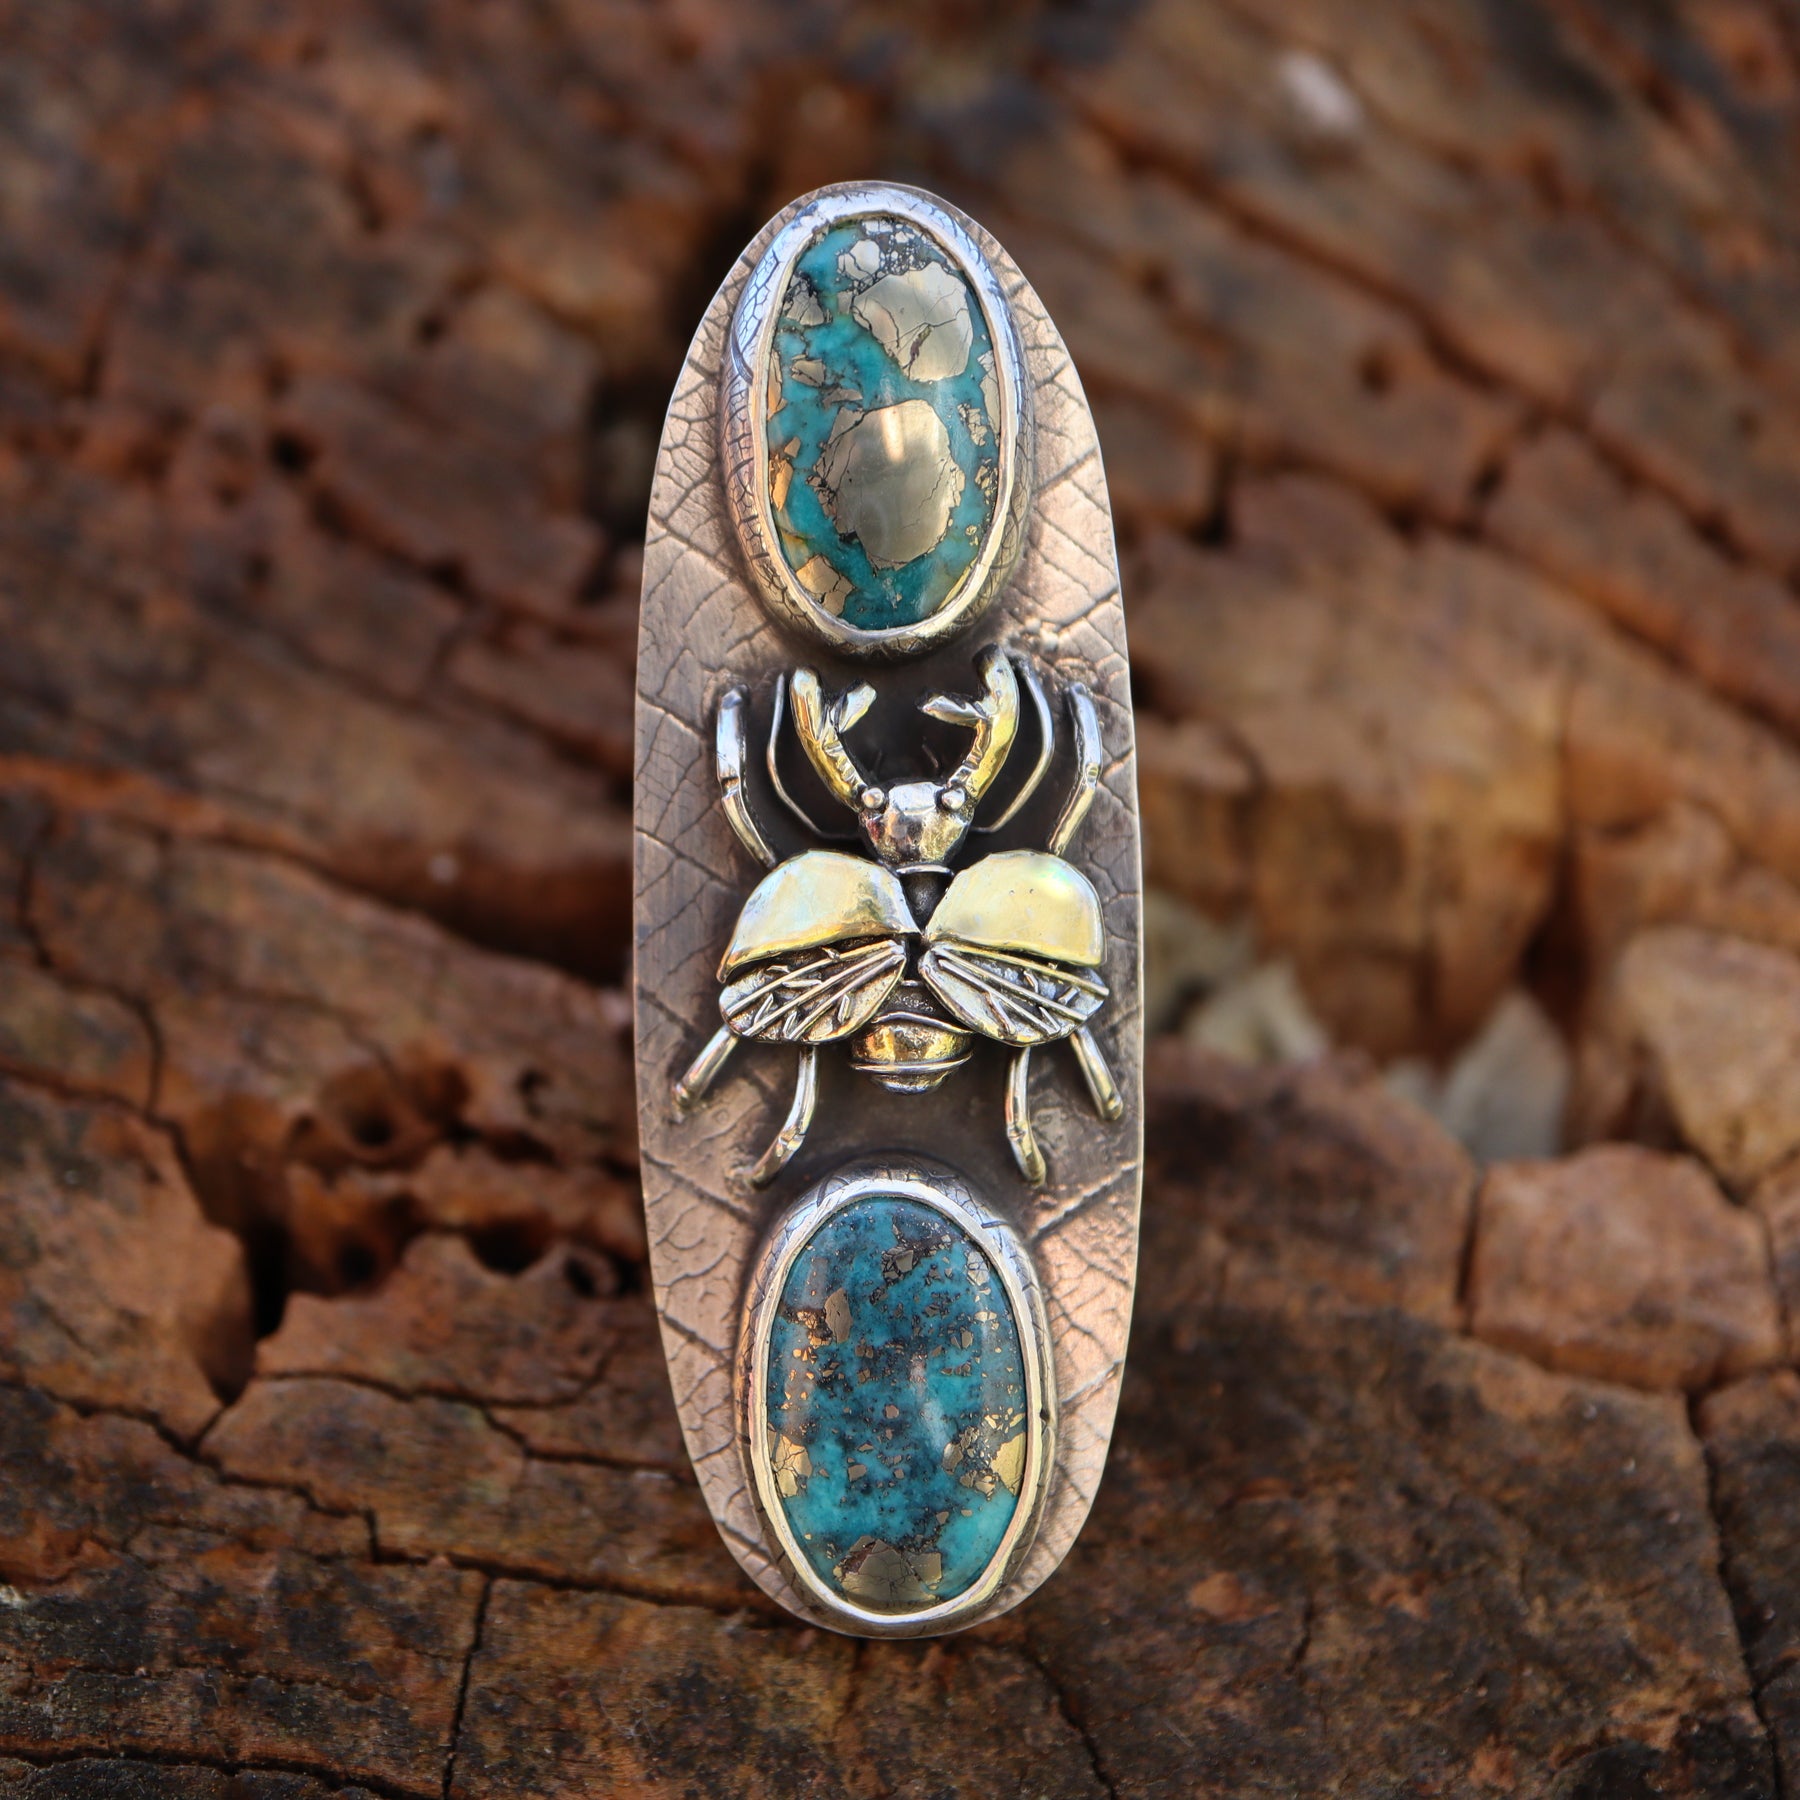 Sterling silver and 24 karat gold stag beetle ring with two morenci turquoise stones with flecks of silver pyrite in them. The background of the ring is pressed with a real leaf and is about 2 inches tall.